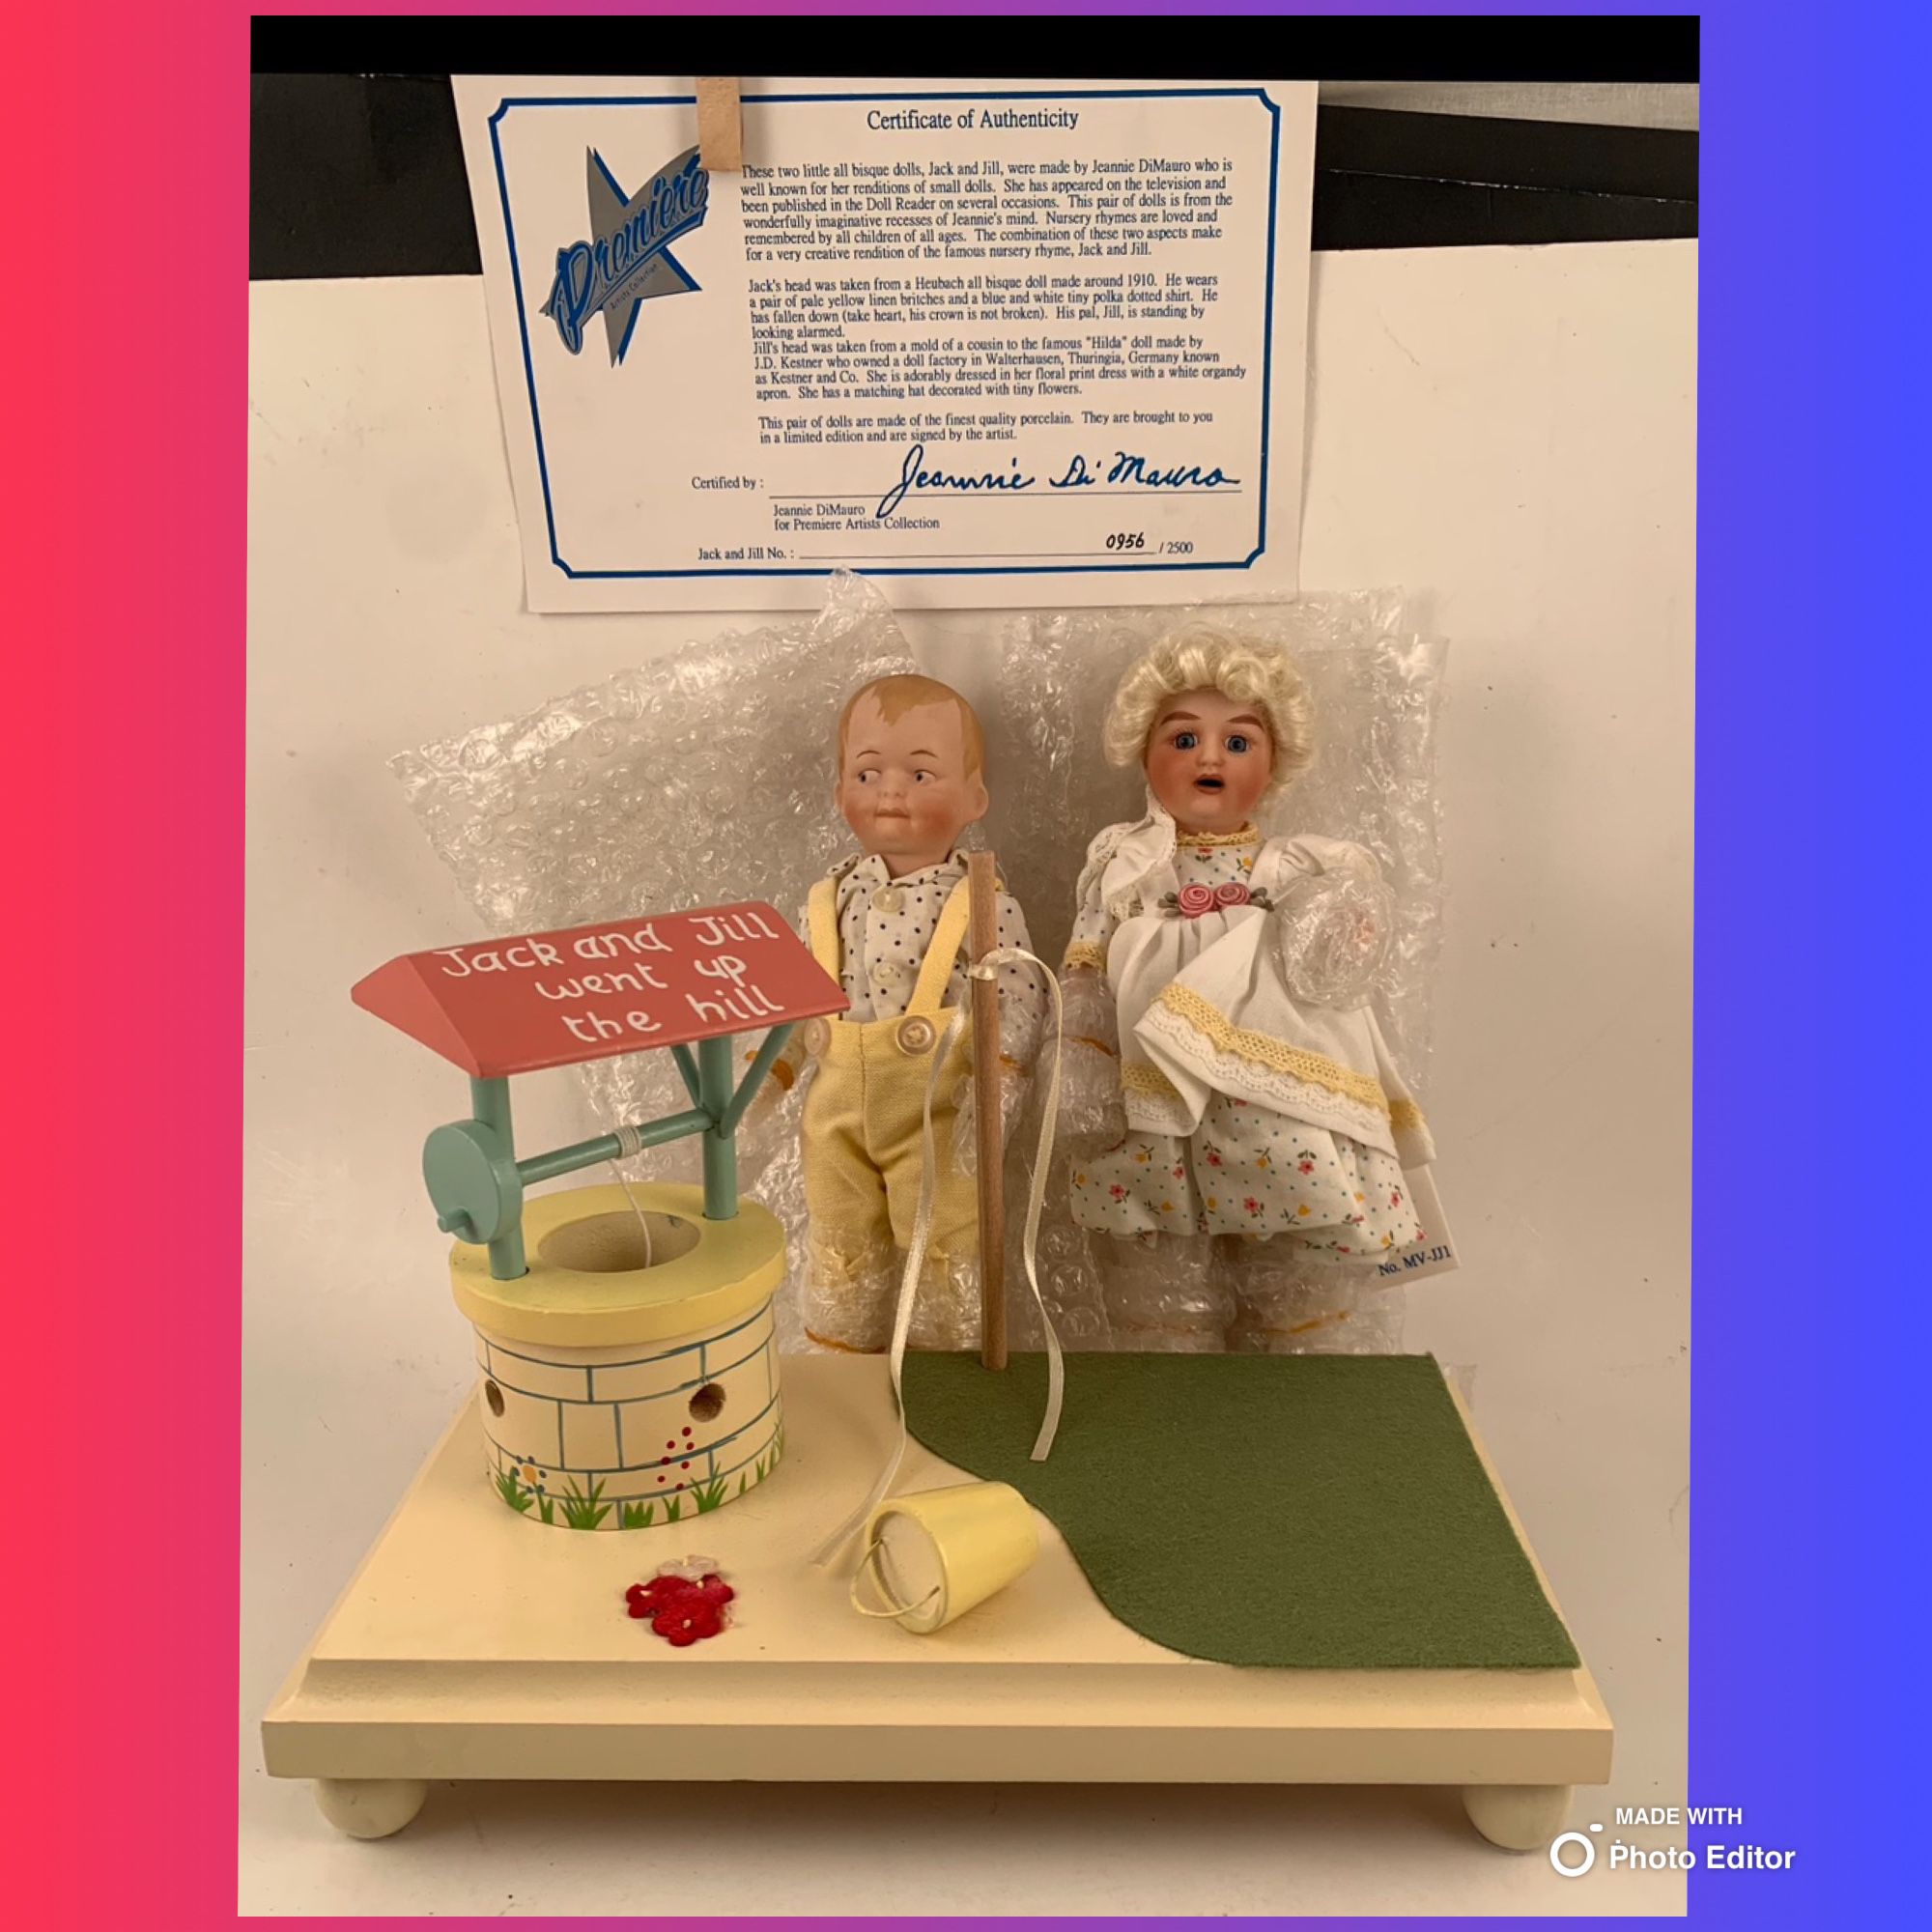 JEANNIE DI MAURO PORCELAIN DOLLS “Jack & Jill Went Up The Hill” Set NEW In Original Package